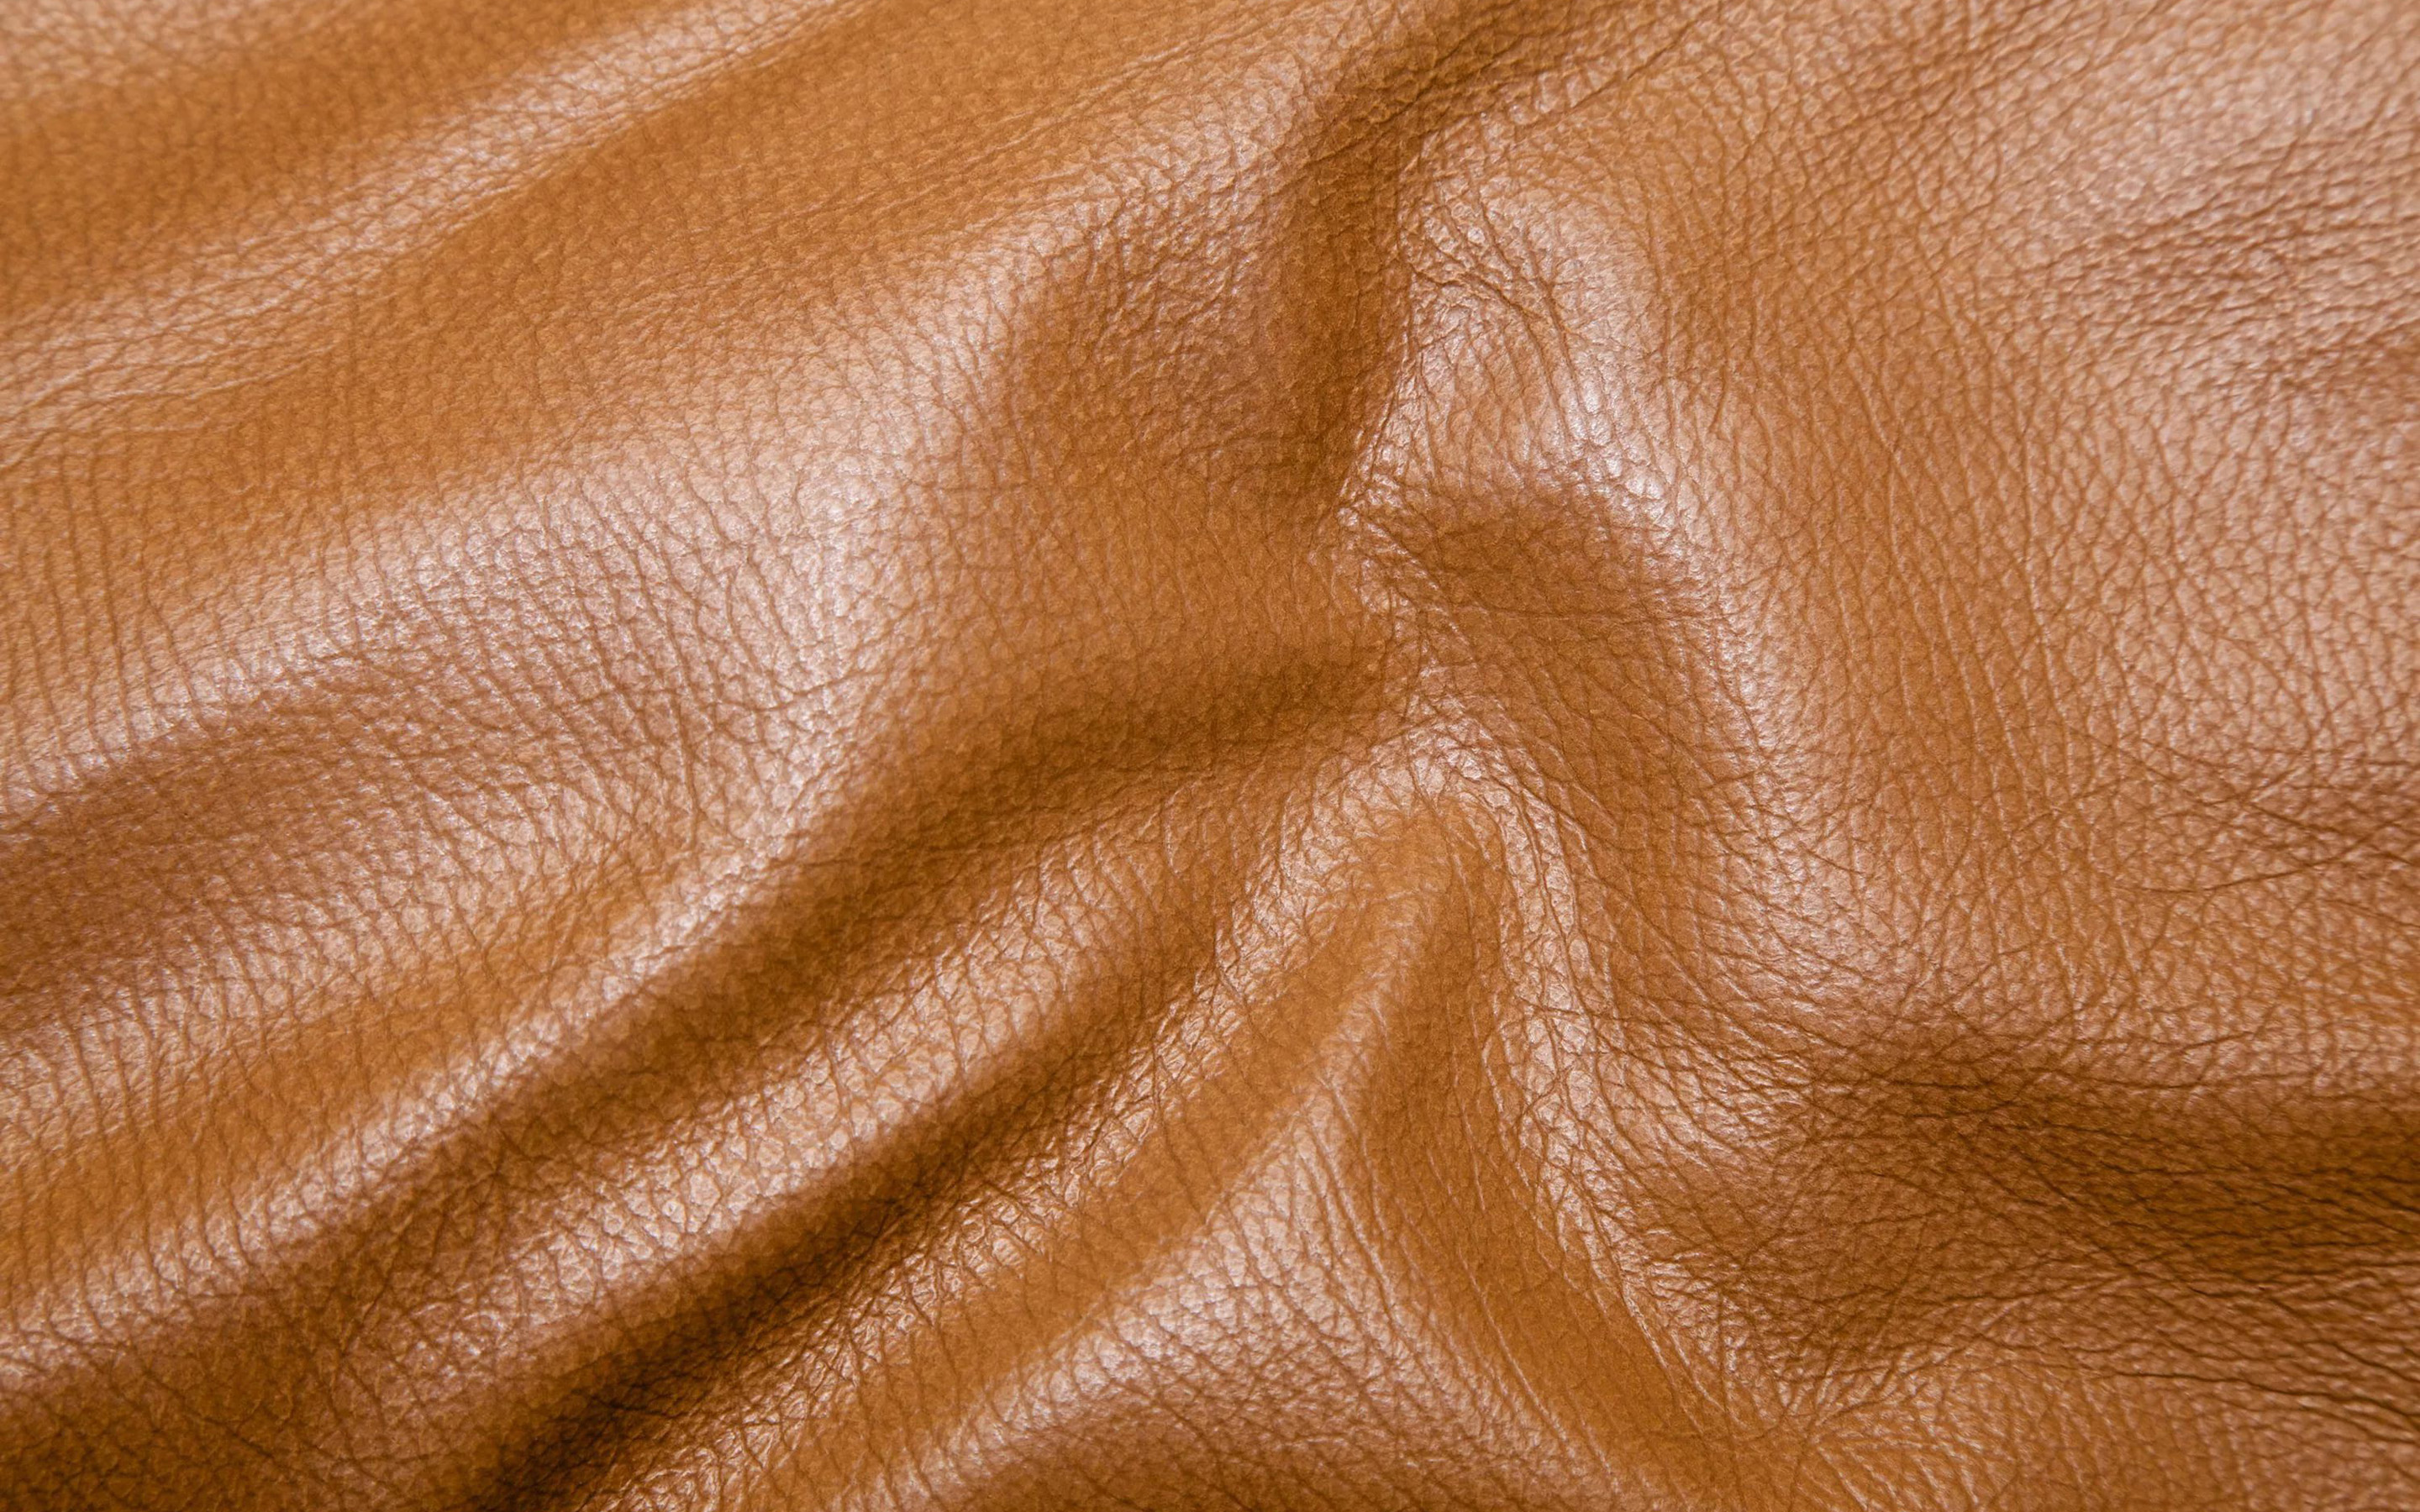 Download wallpapers brown leather texture, leather ...